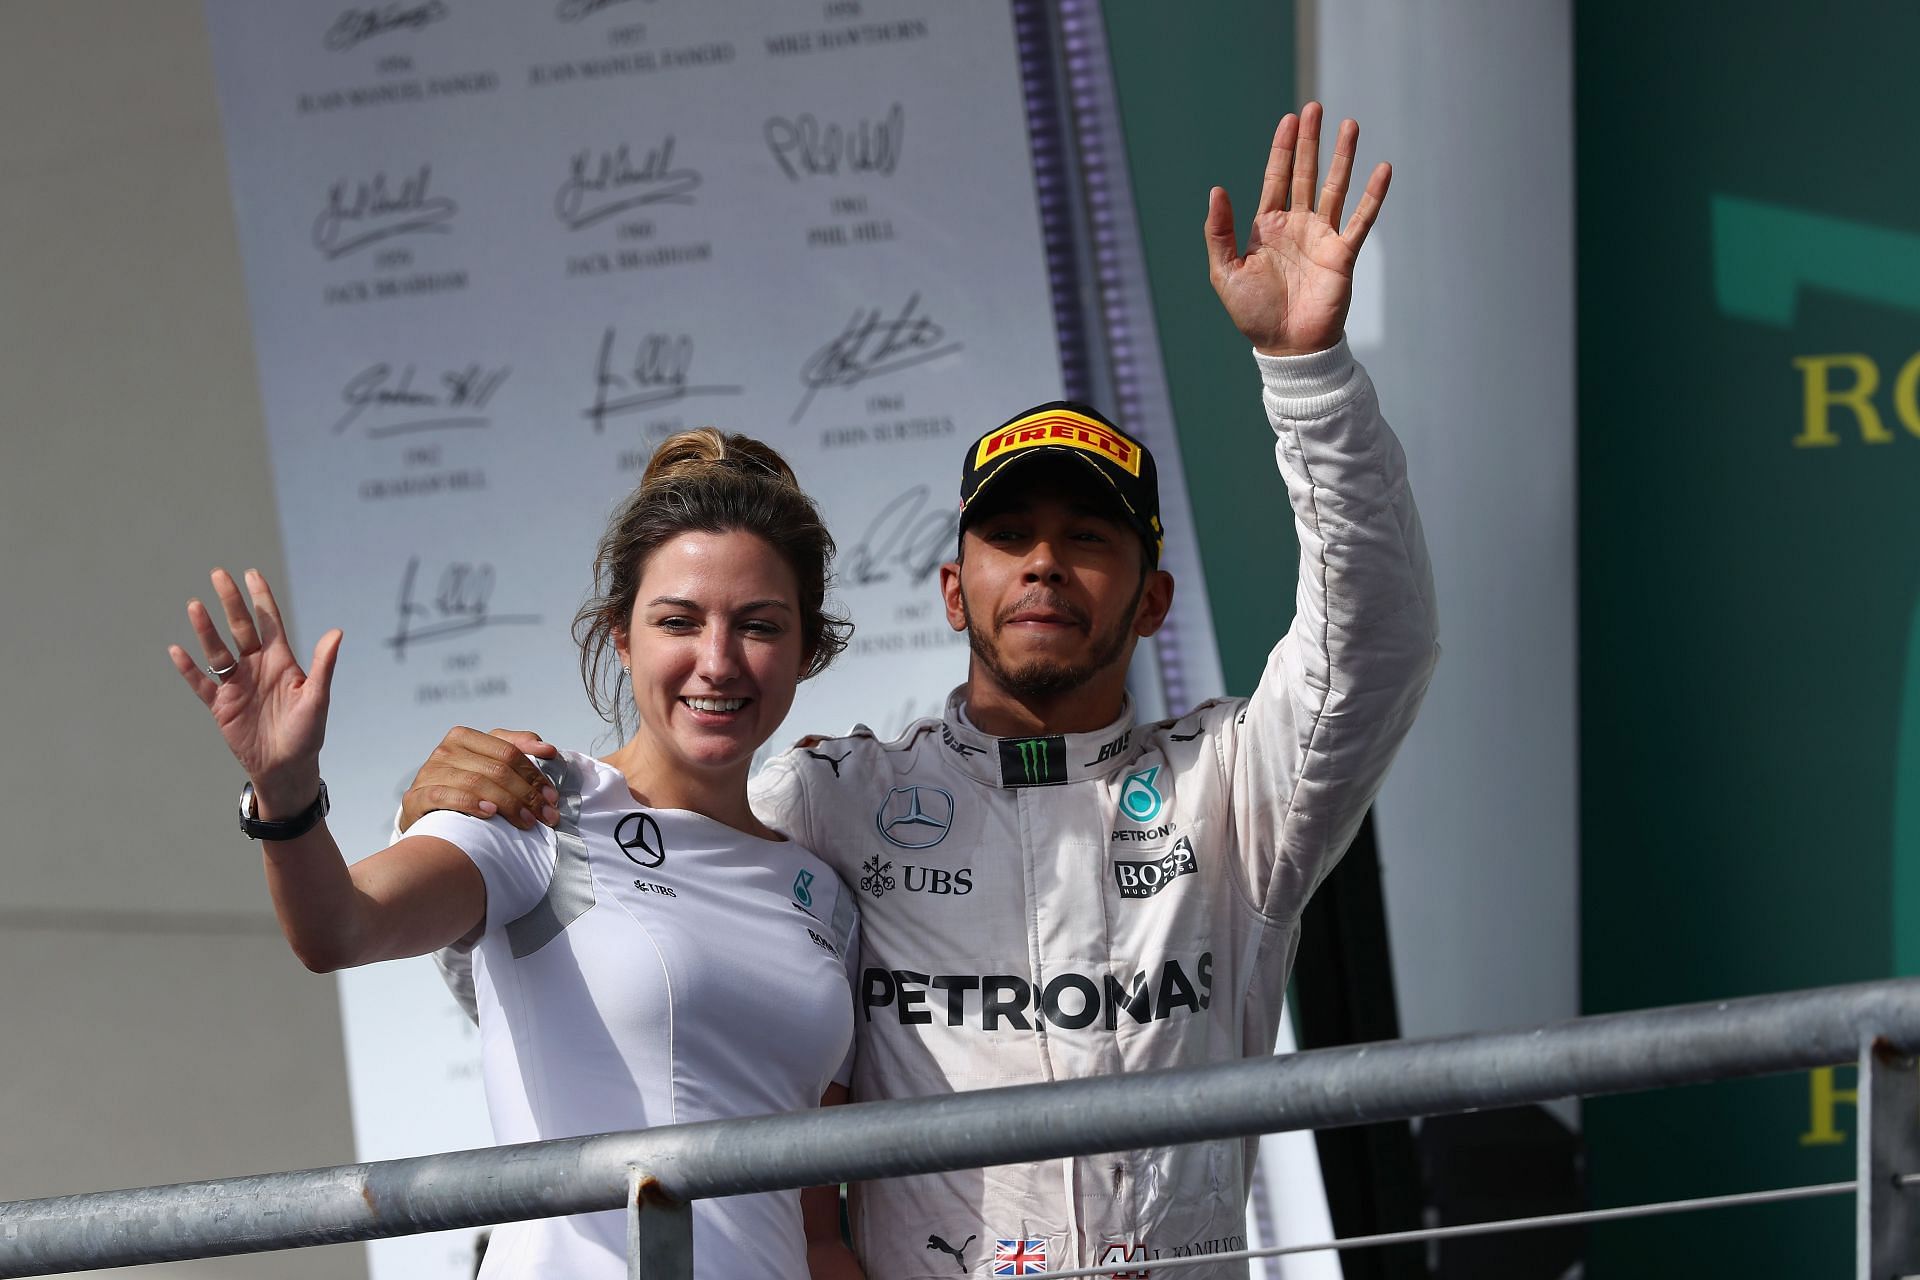 Lewis Hamilton celebrates his win with Victoria Vowles on the podium during the United States Formula One Grand Prix at Circuit of The Americas on October 23, 2016, in Austin, United States (Photo by Clive Mason/Getty Images)